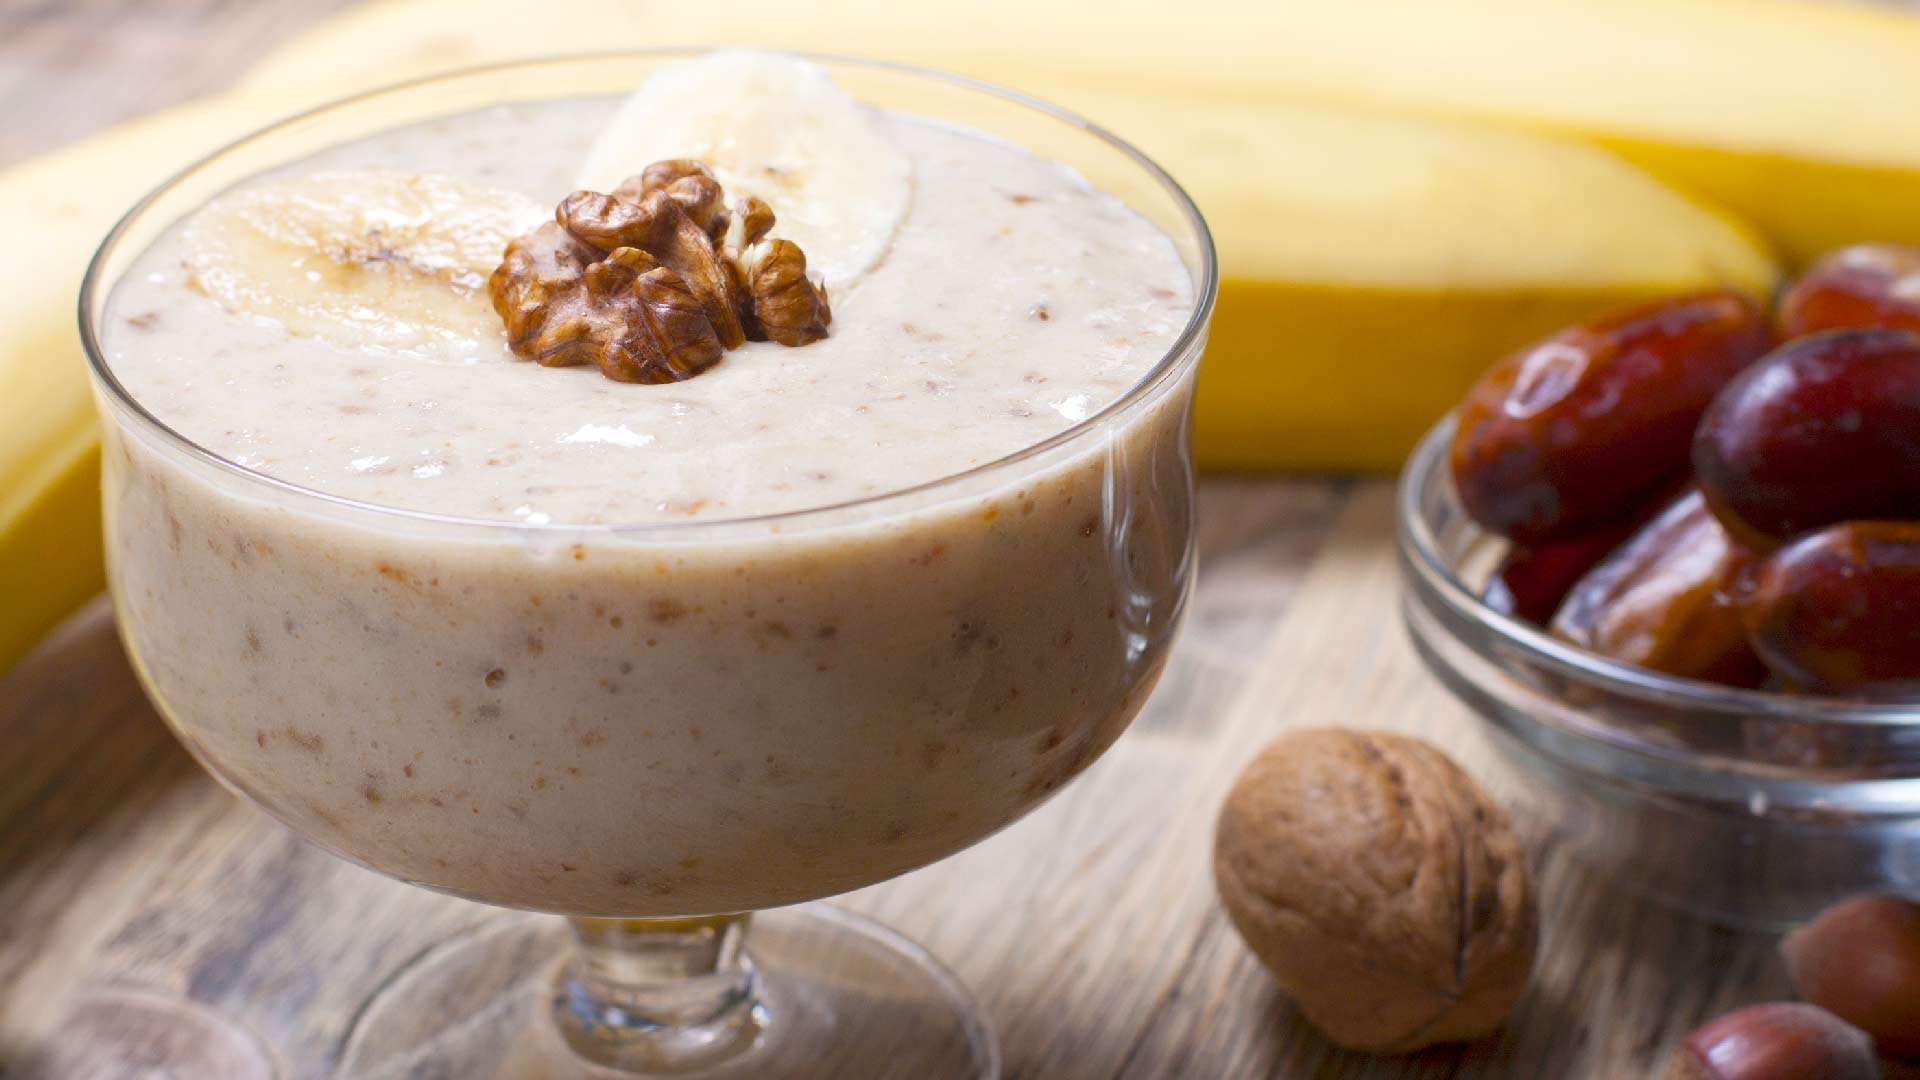 Dates Banana Smoothie: Date Delight